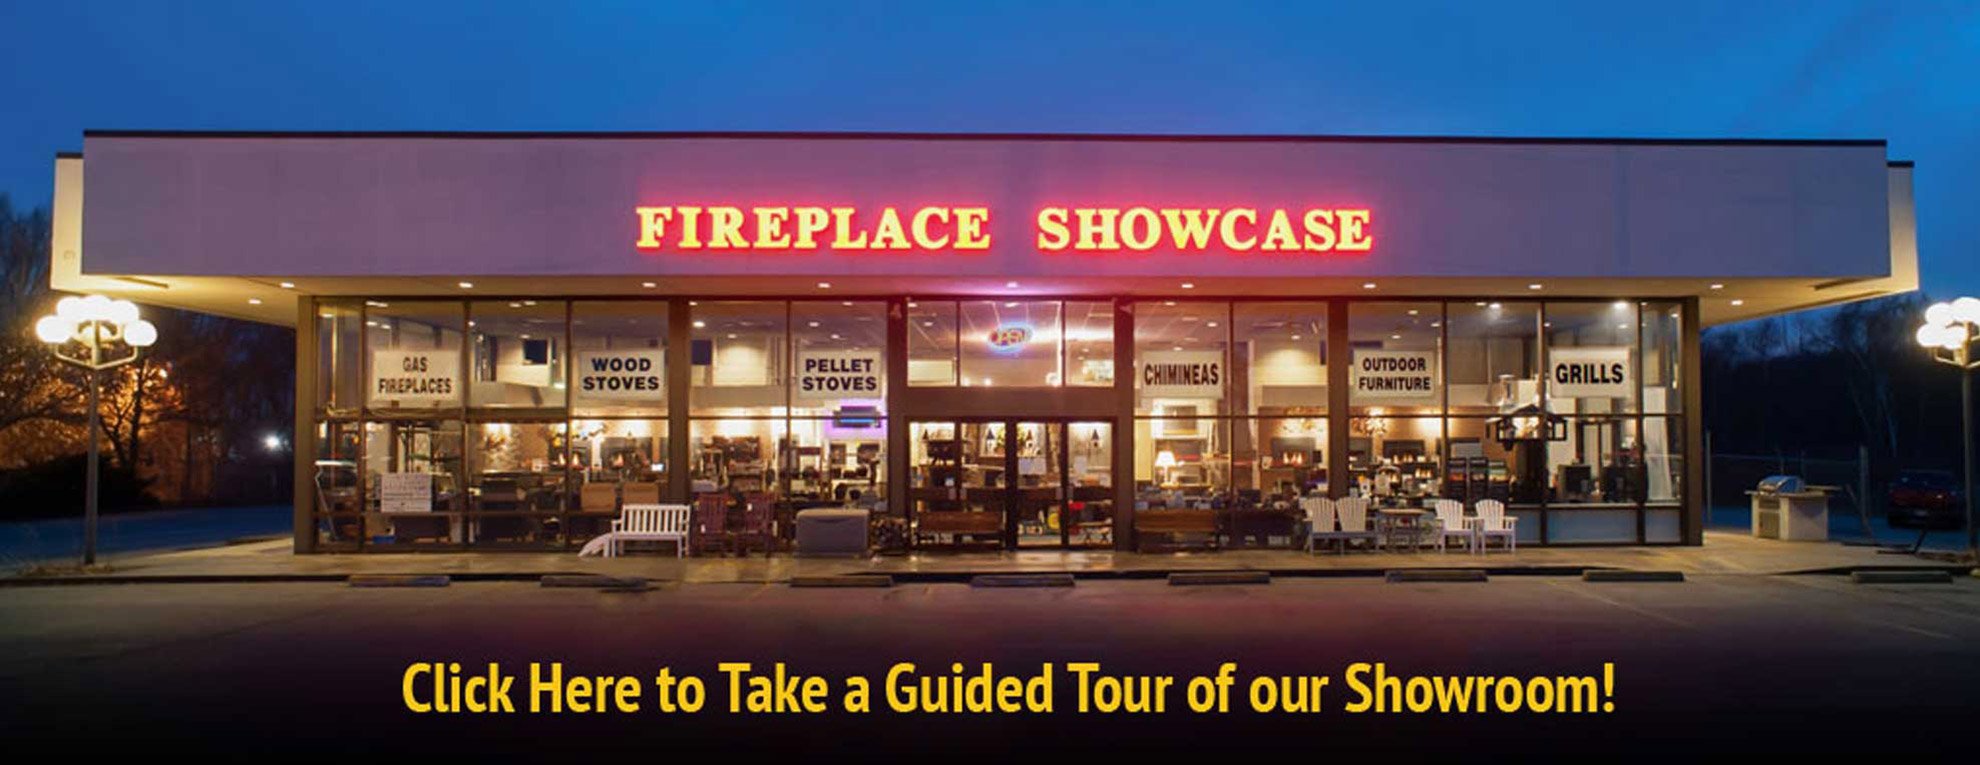 Fireplaces Store, MA, RI, Pellet Wood Stoves, Fireplace ...